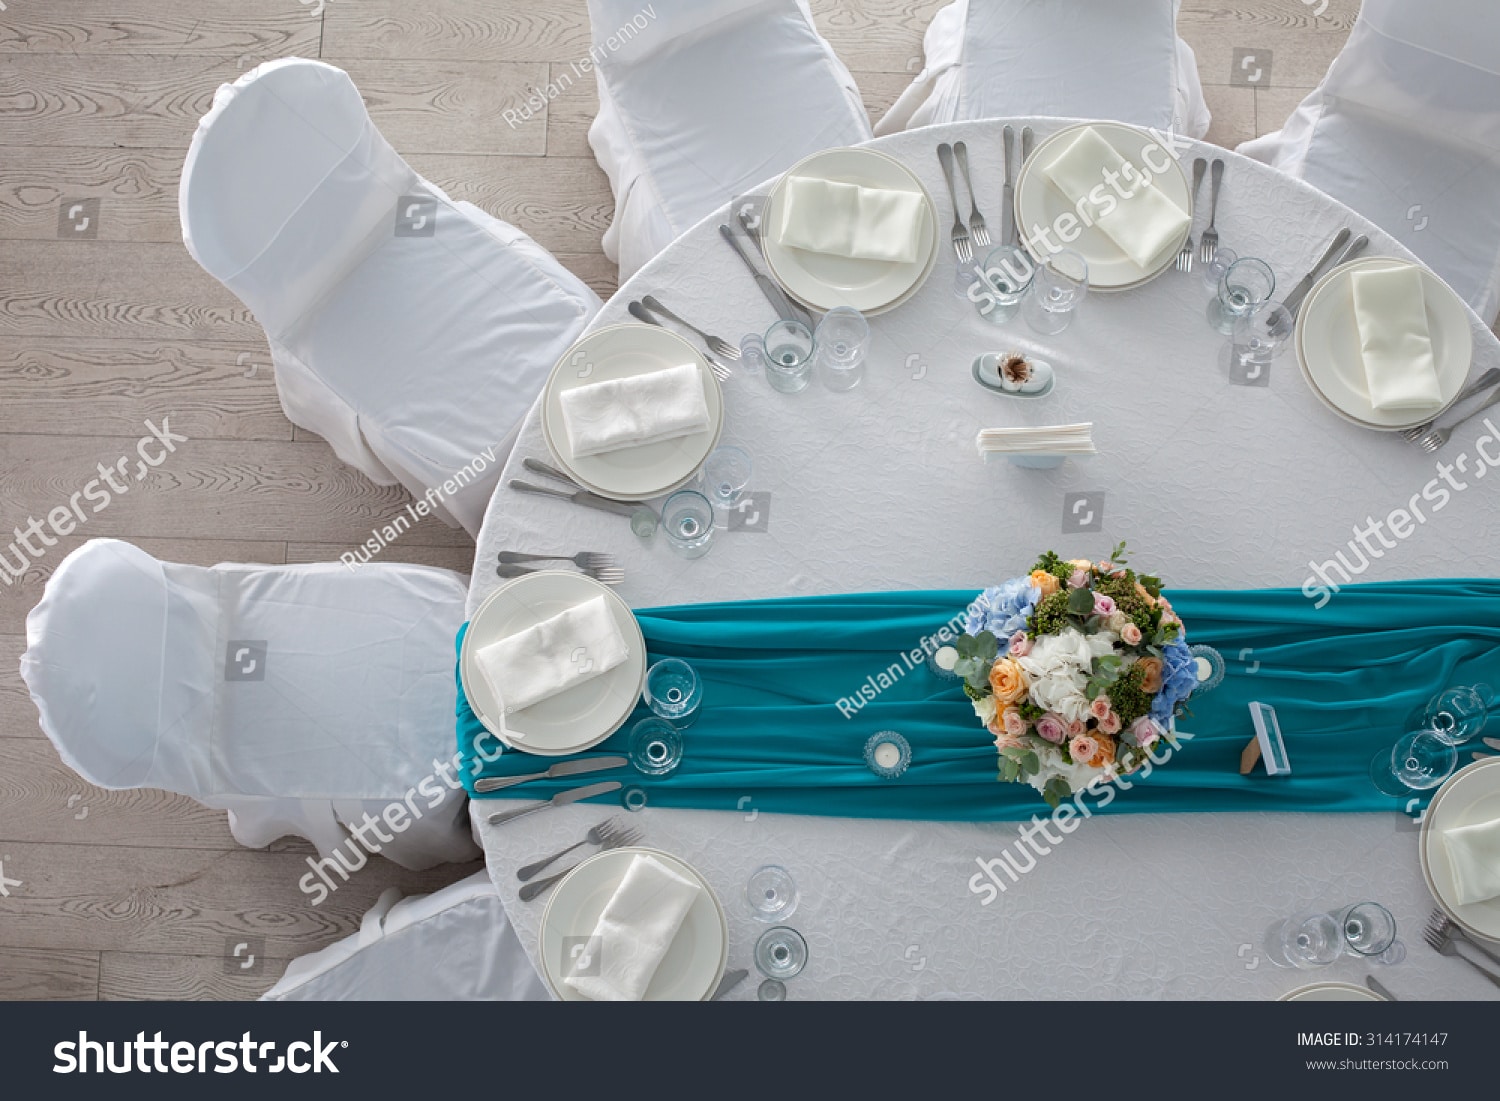 stock-photo-elegance-table-set-up-for-wedding-in-turquoise-top-view-314174147